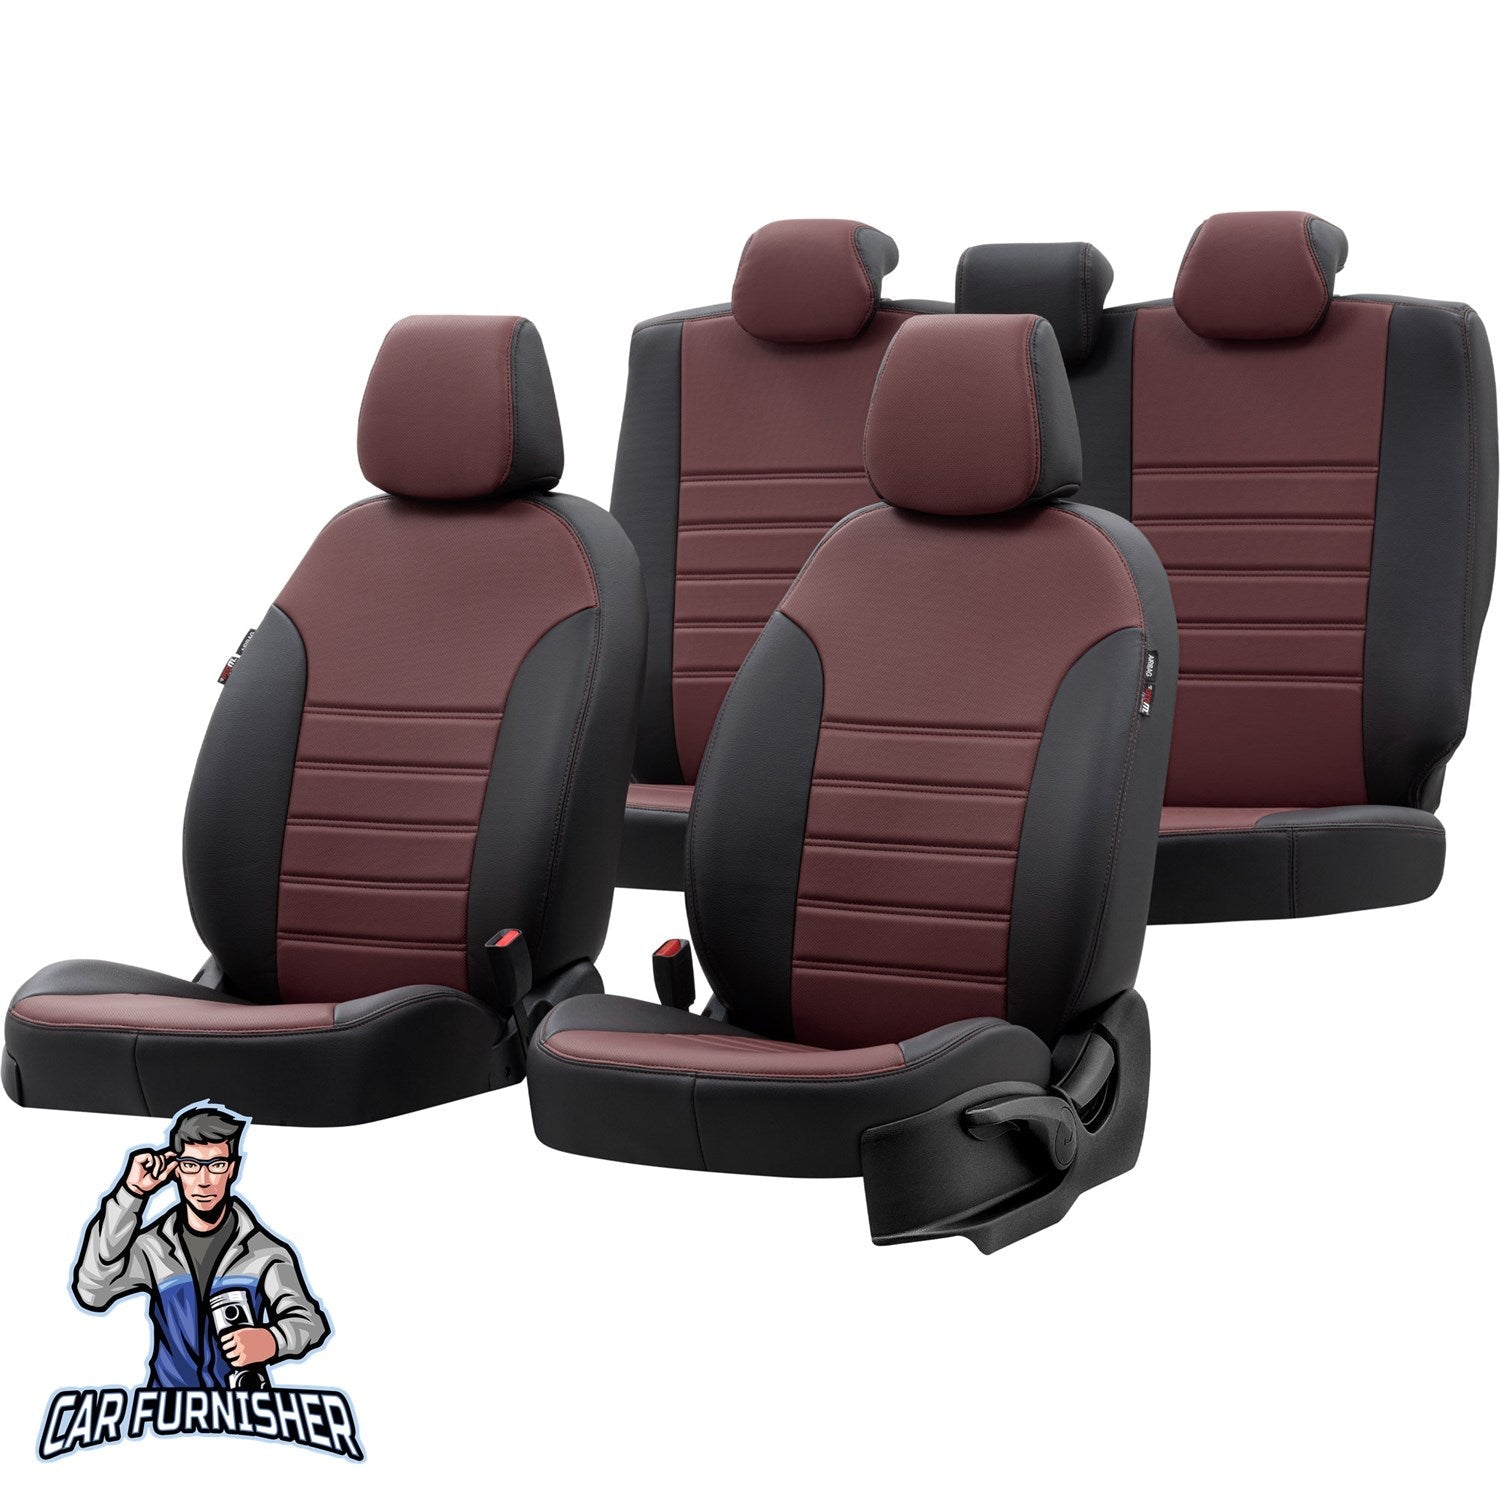 Volvo S60 Car Seat Cover 2000-2018 T4/T5/T6/T8/D5 Istanbul Design Burgundy Full Set (5 Seats + Handrest) Leather & Fabric